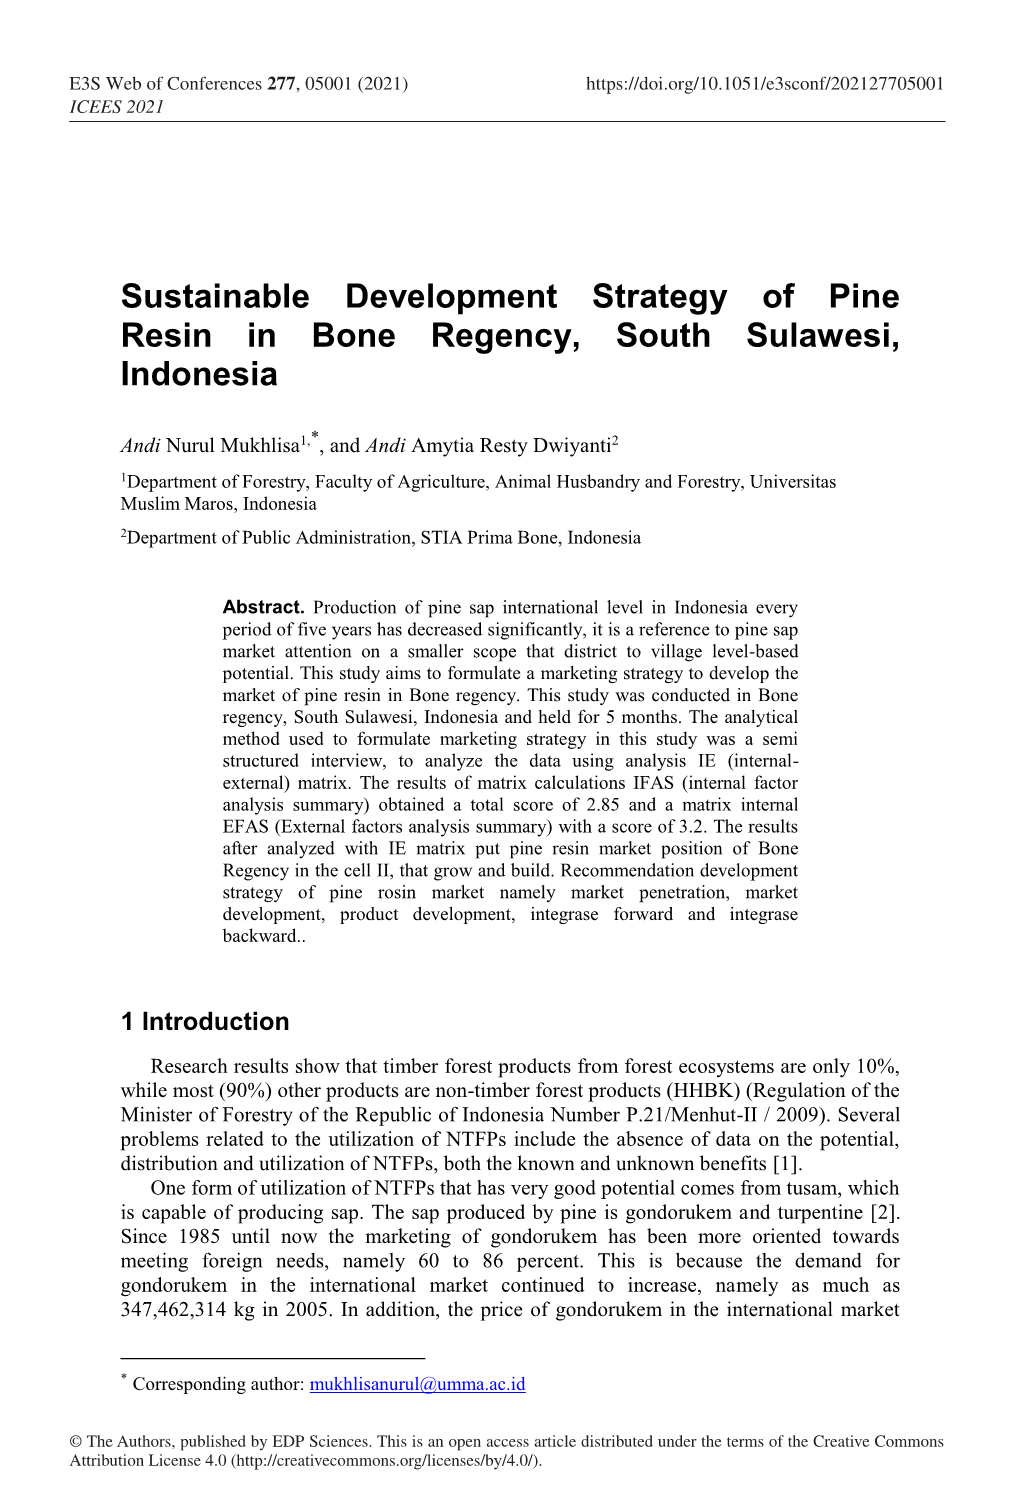 Sustainable Development Strategy of Pine Resin in Bone Regency, South Sulawesi, Indonesia